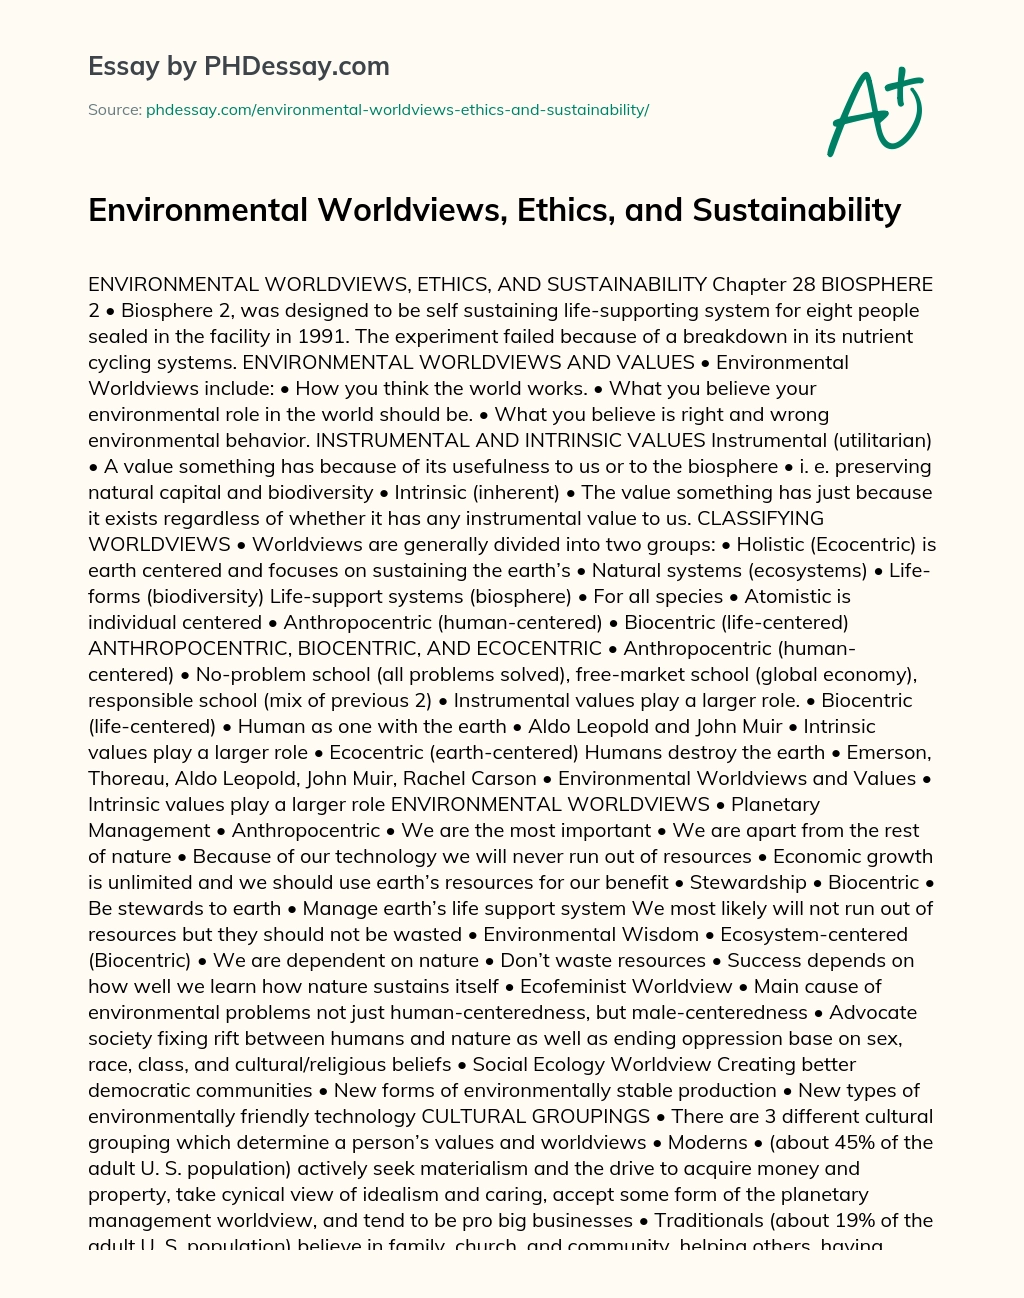 Environmental Worldviews, Ethics, and Sustainability essay